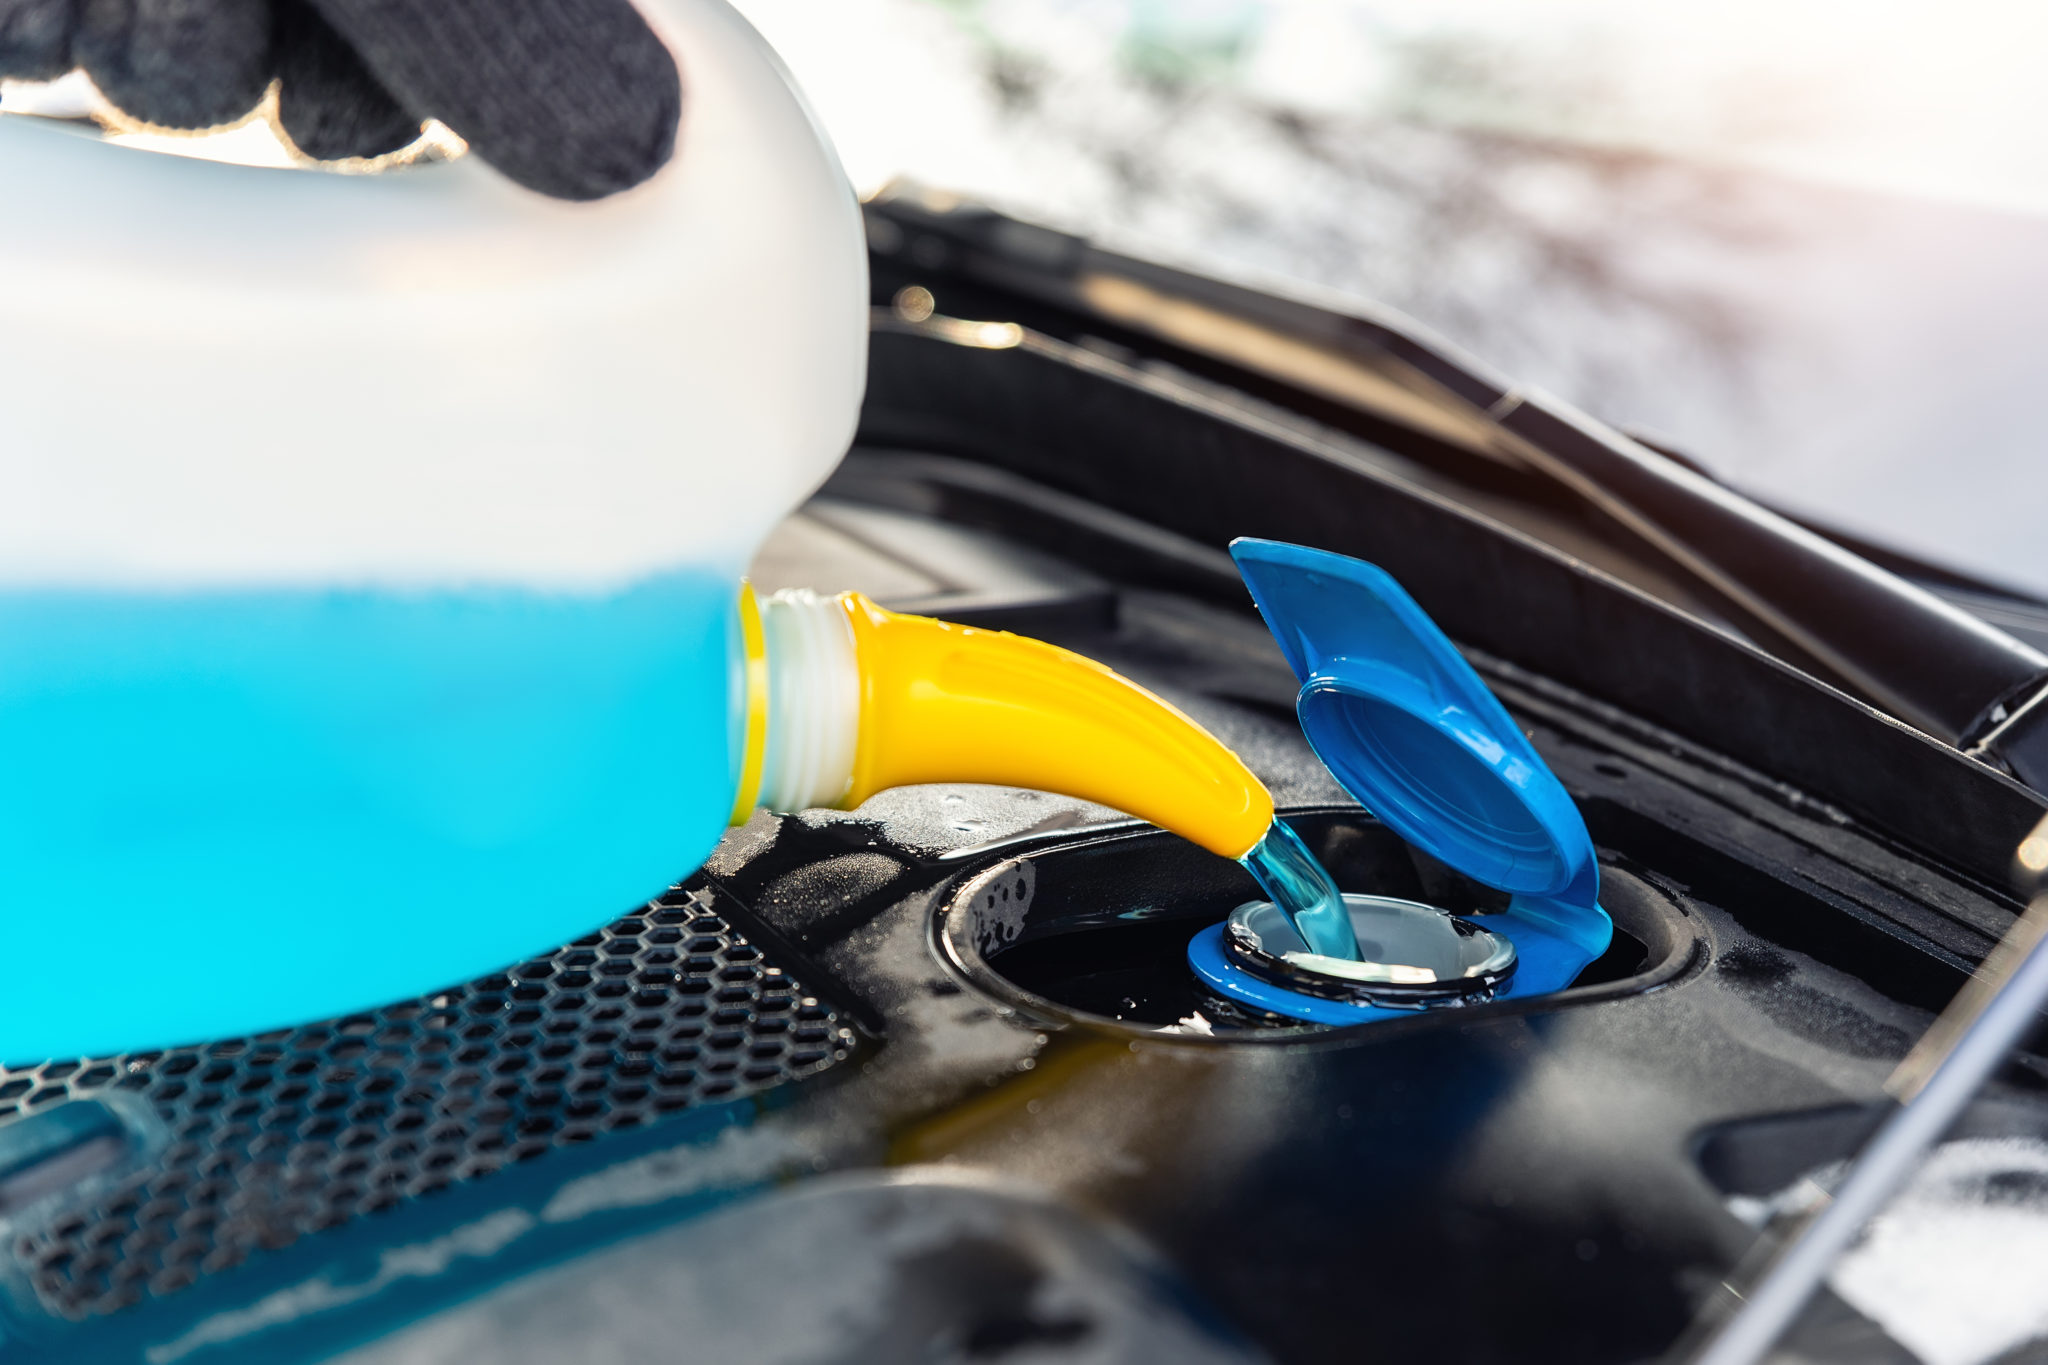 https://autolab.com.co/wp-content/uploads/2022/01/driver-hand-in-gloves-pouring-blue-antifreeze-li-2022-09-15-23-24-19-utc-scaled.jpg